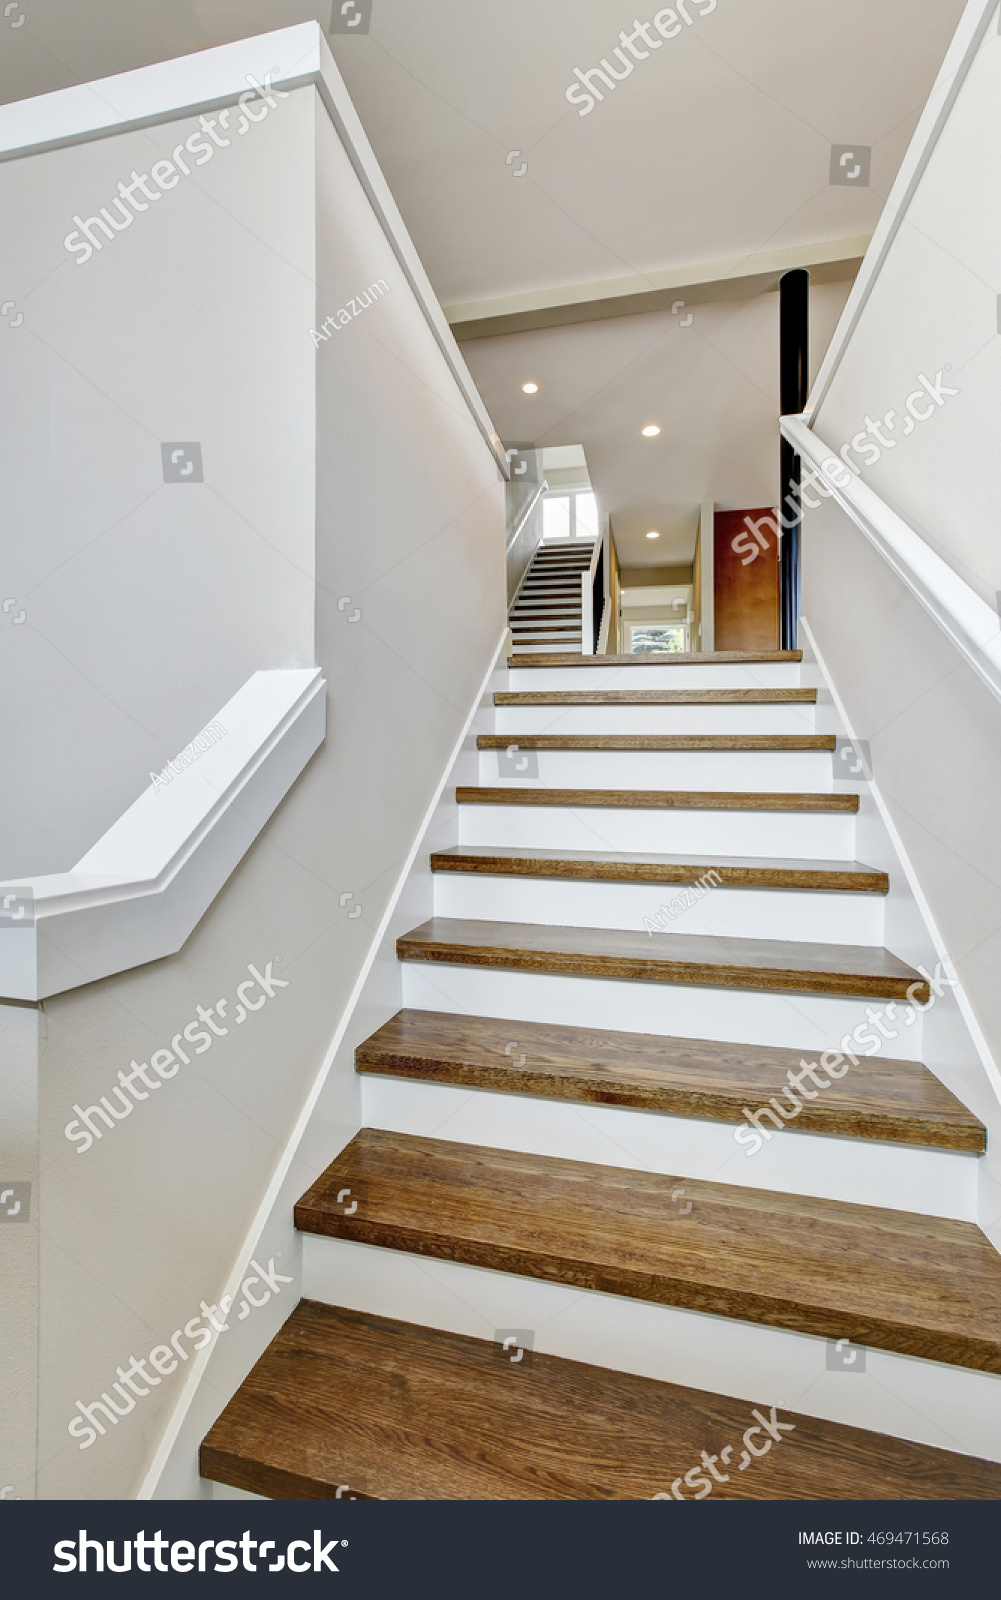 View of hardwood stairs to second floor. Northwest, USA #469471568